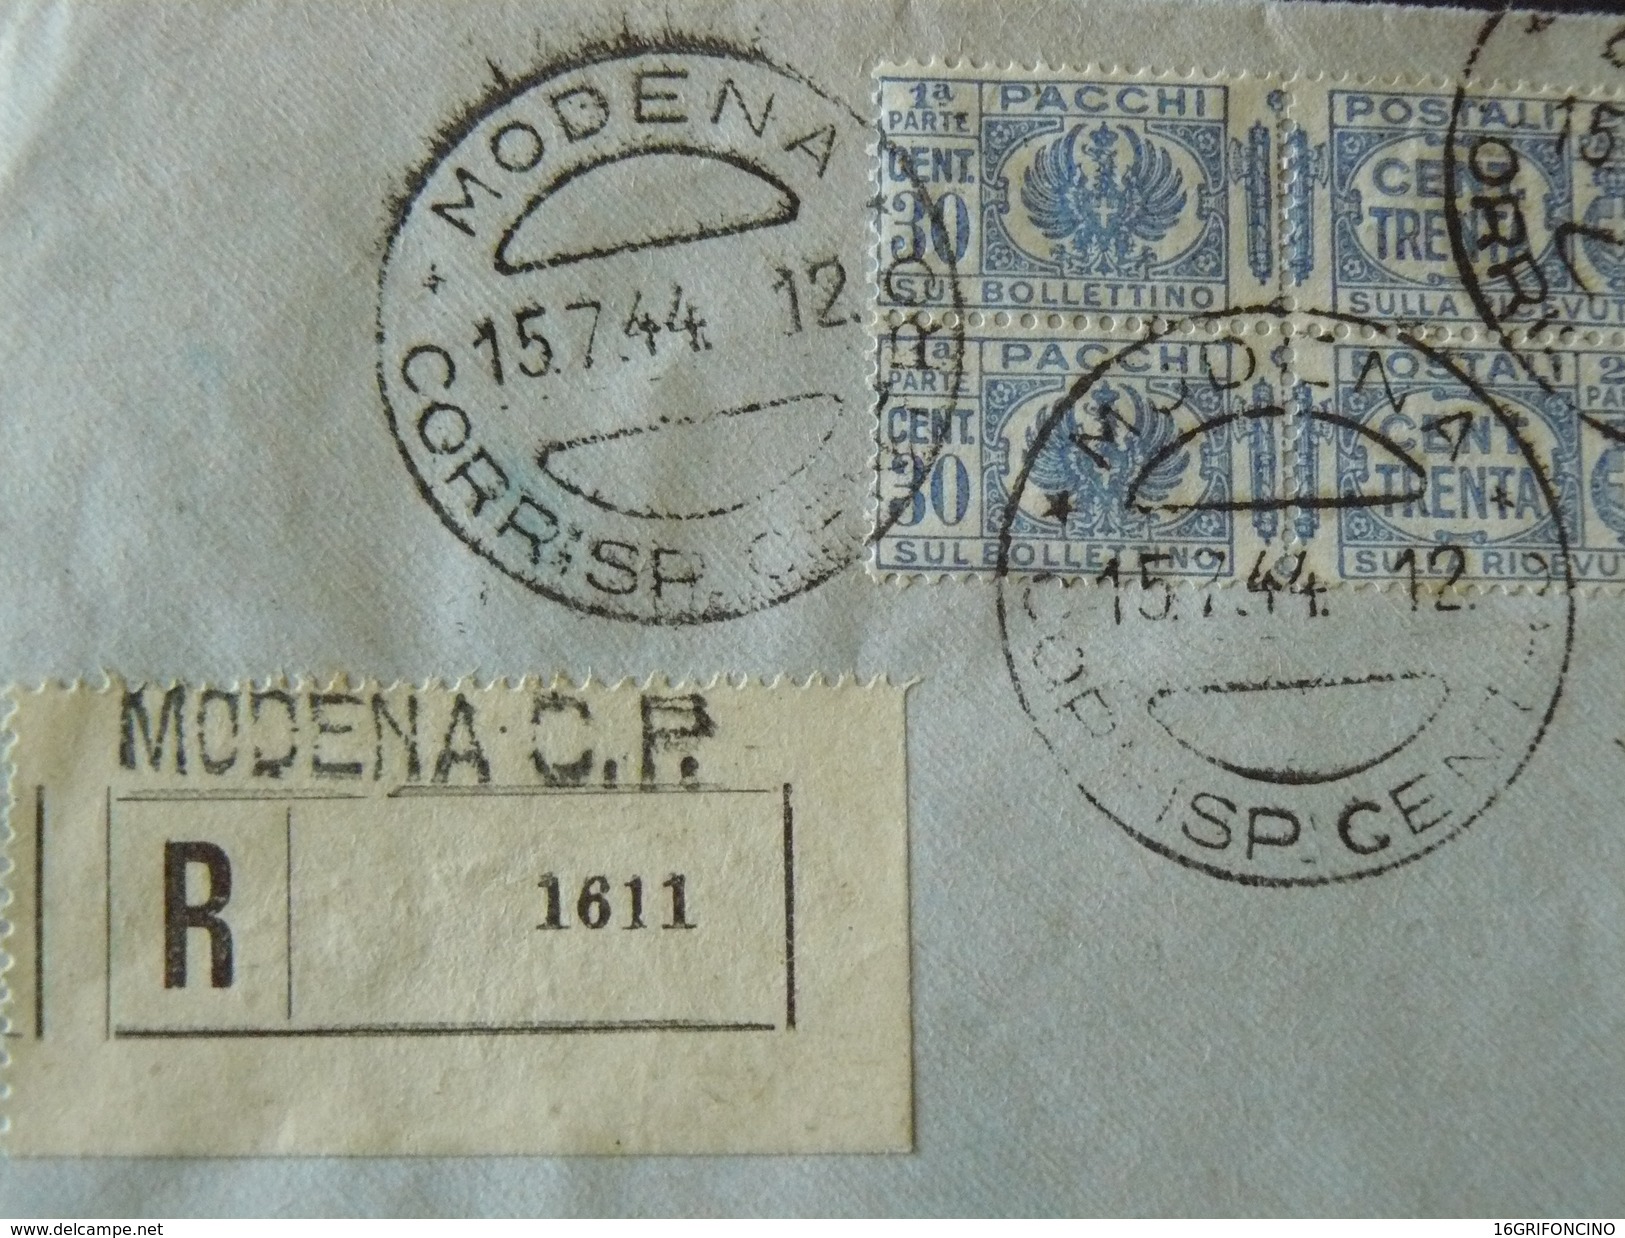 BEAUTIFUL LETTER 15-7-1944 WITH DIFFERENTS POSTAGESTAMPS " USED TARDY " HIGH VALUE..//..ALTO VALORE USI TARDIVI + G.N.R - Poststempel